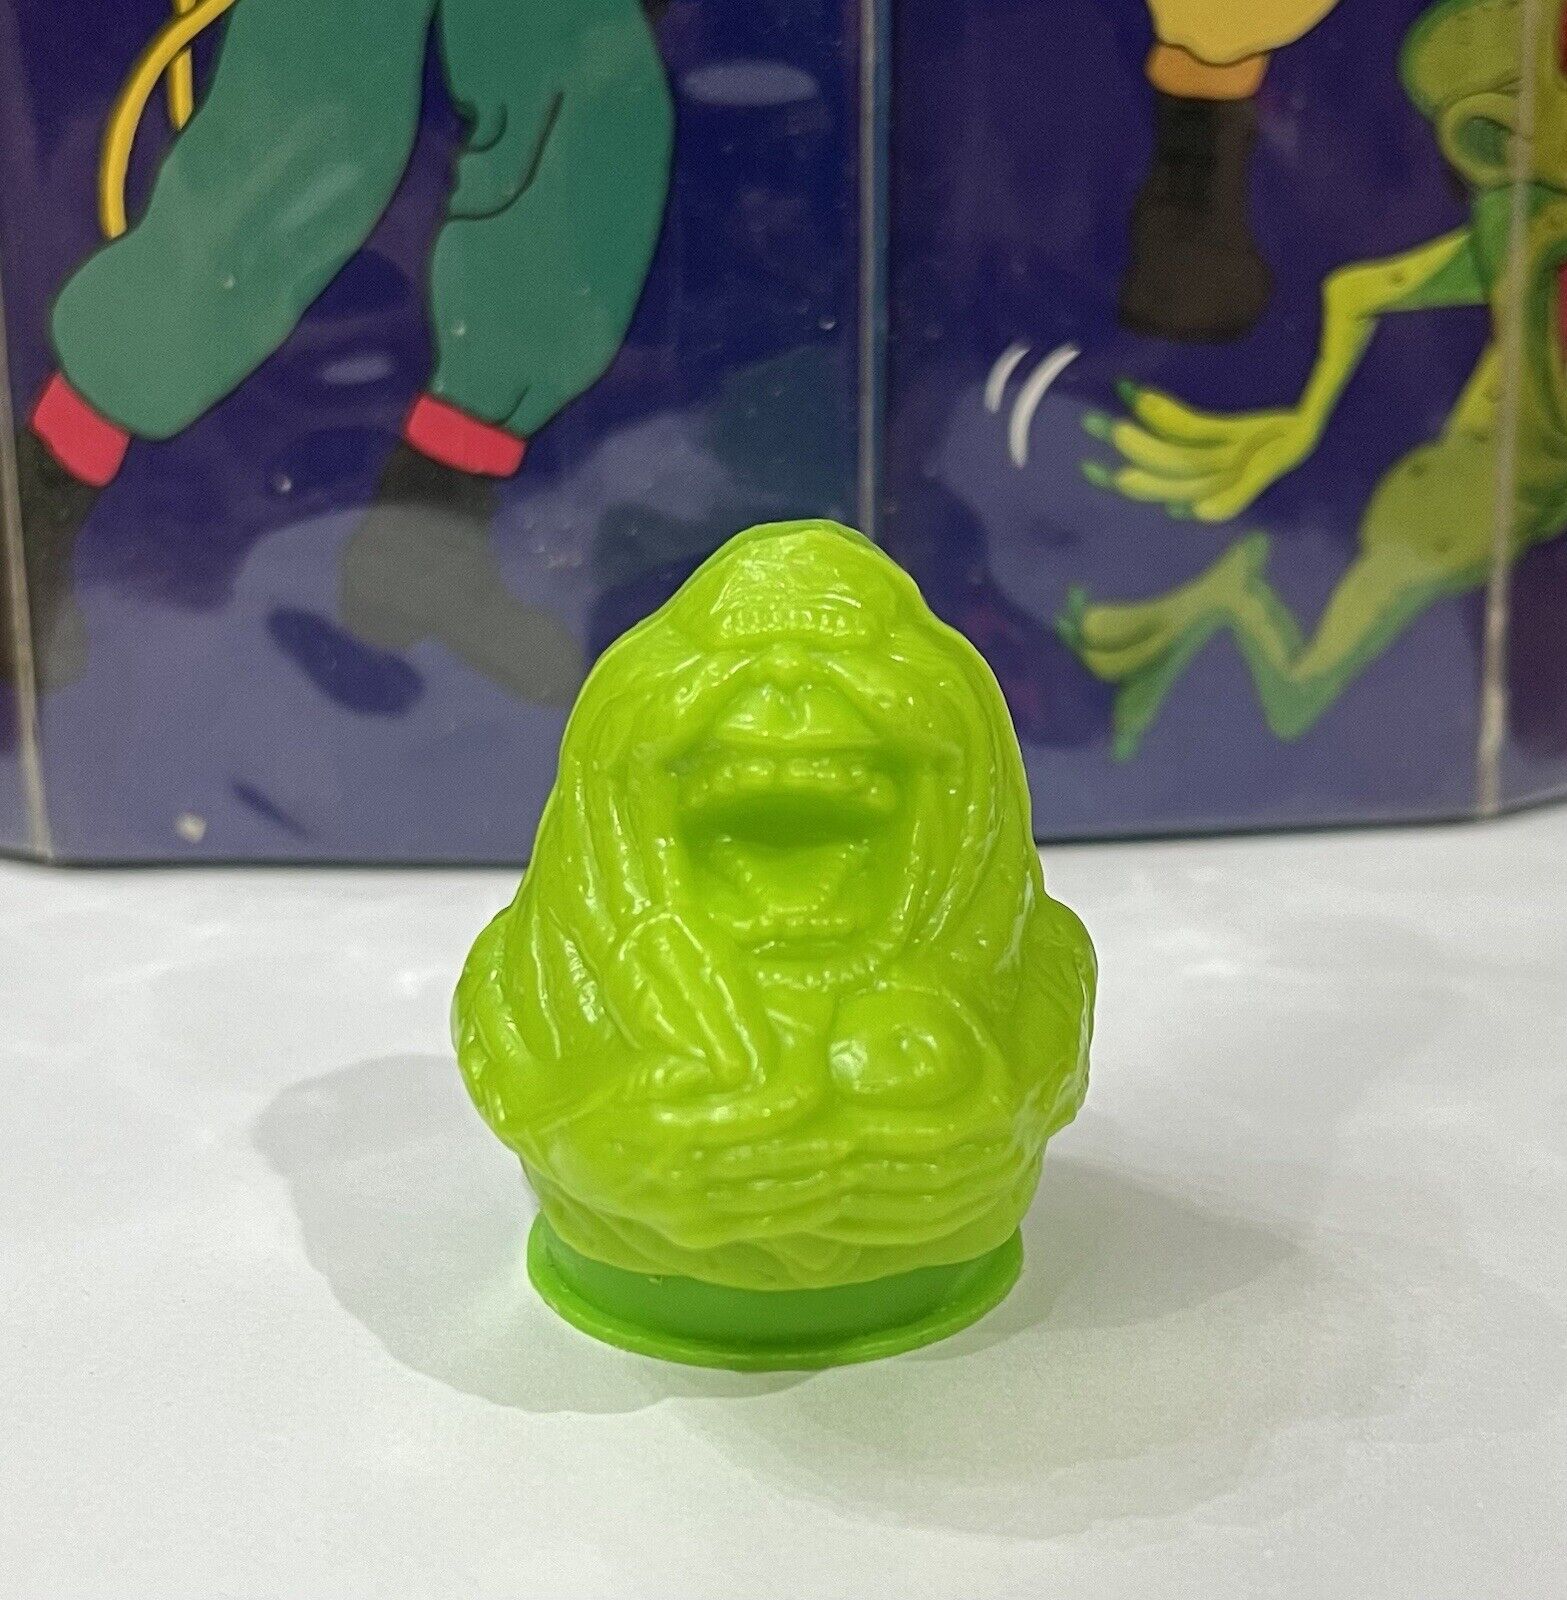 Vintage 1989 Topps SLIMER Candy Container 2.5” GREEN Bubble Gum GHOSTBUSTERS - B